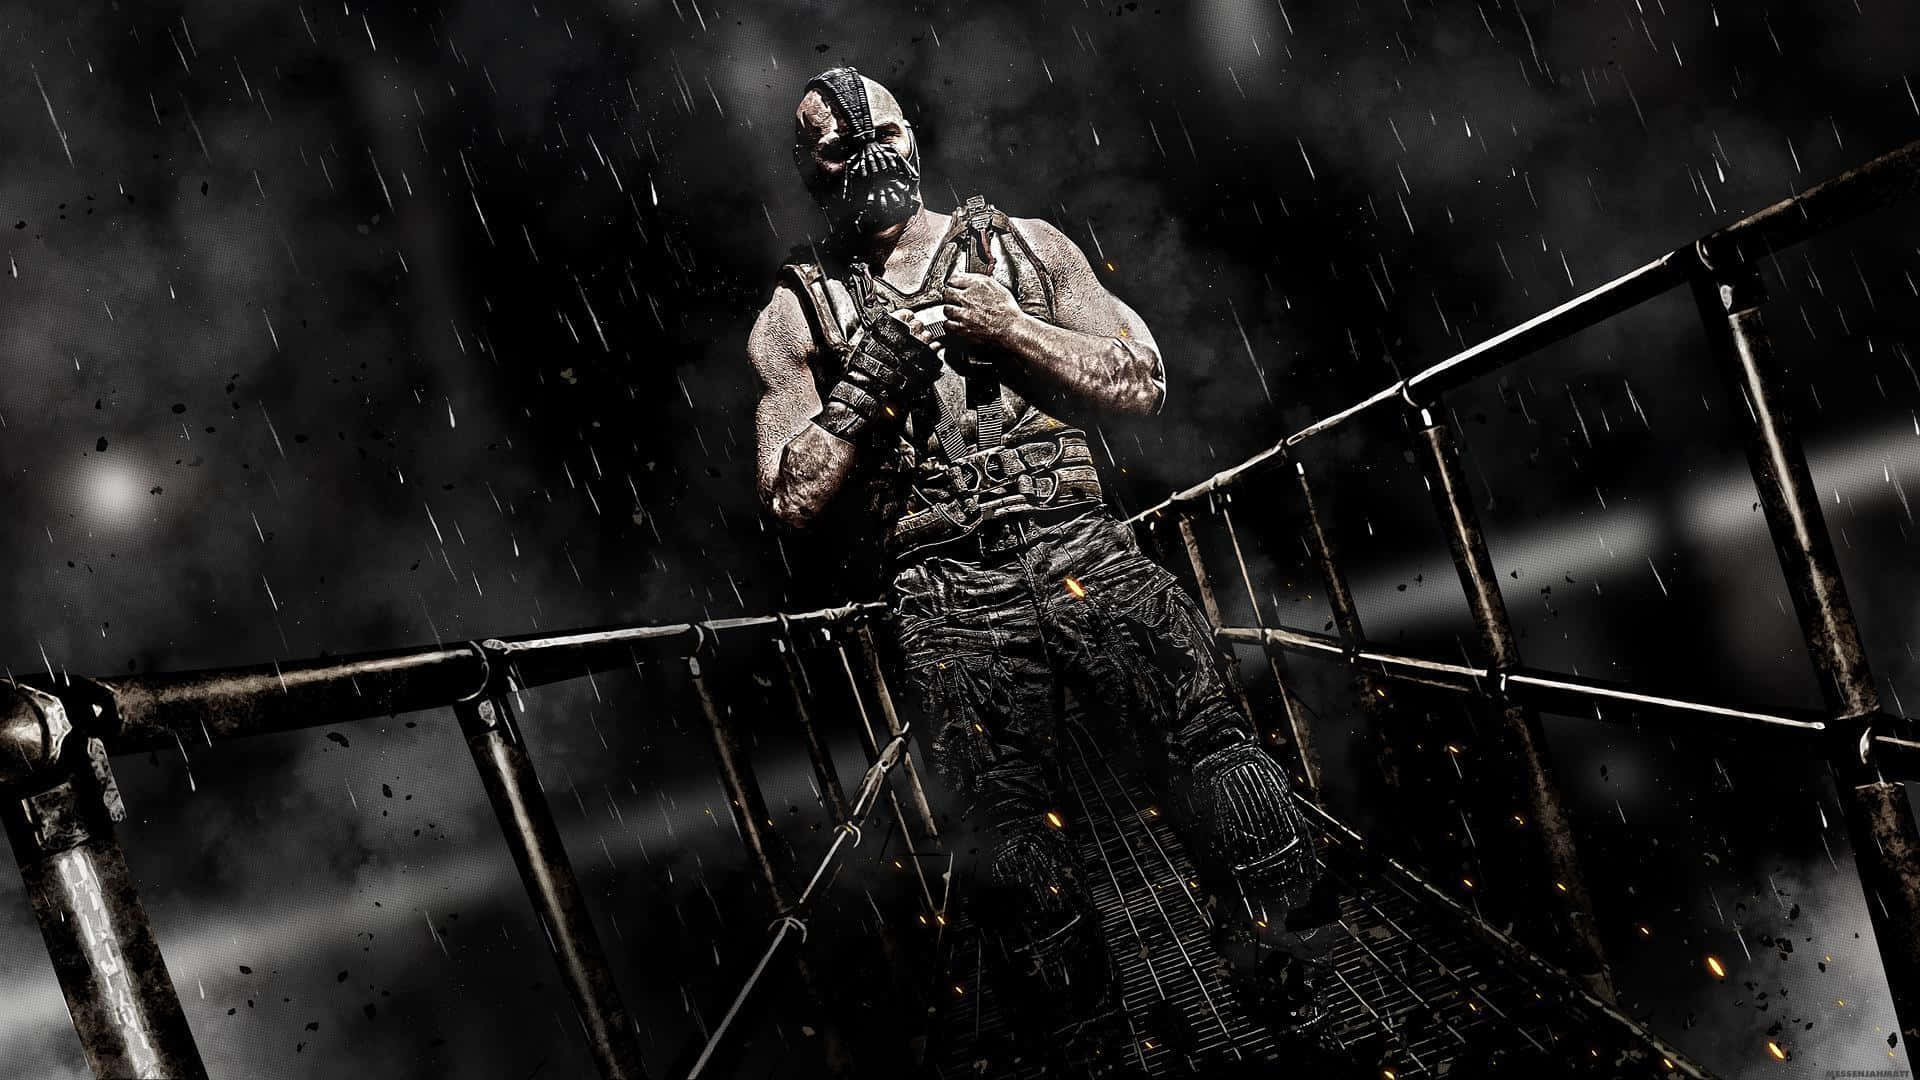 Free Bane Wallpaper Downloads, [100+] Bane Wallpapers for FREE | Wallpapers .com